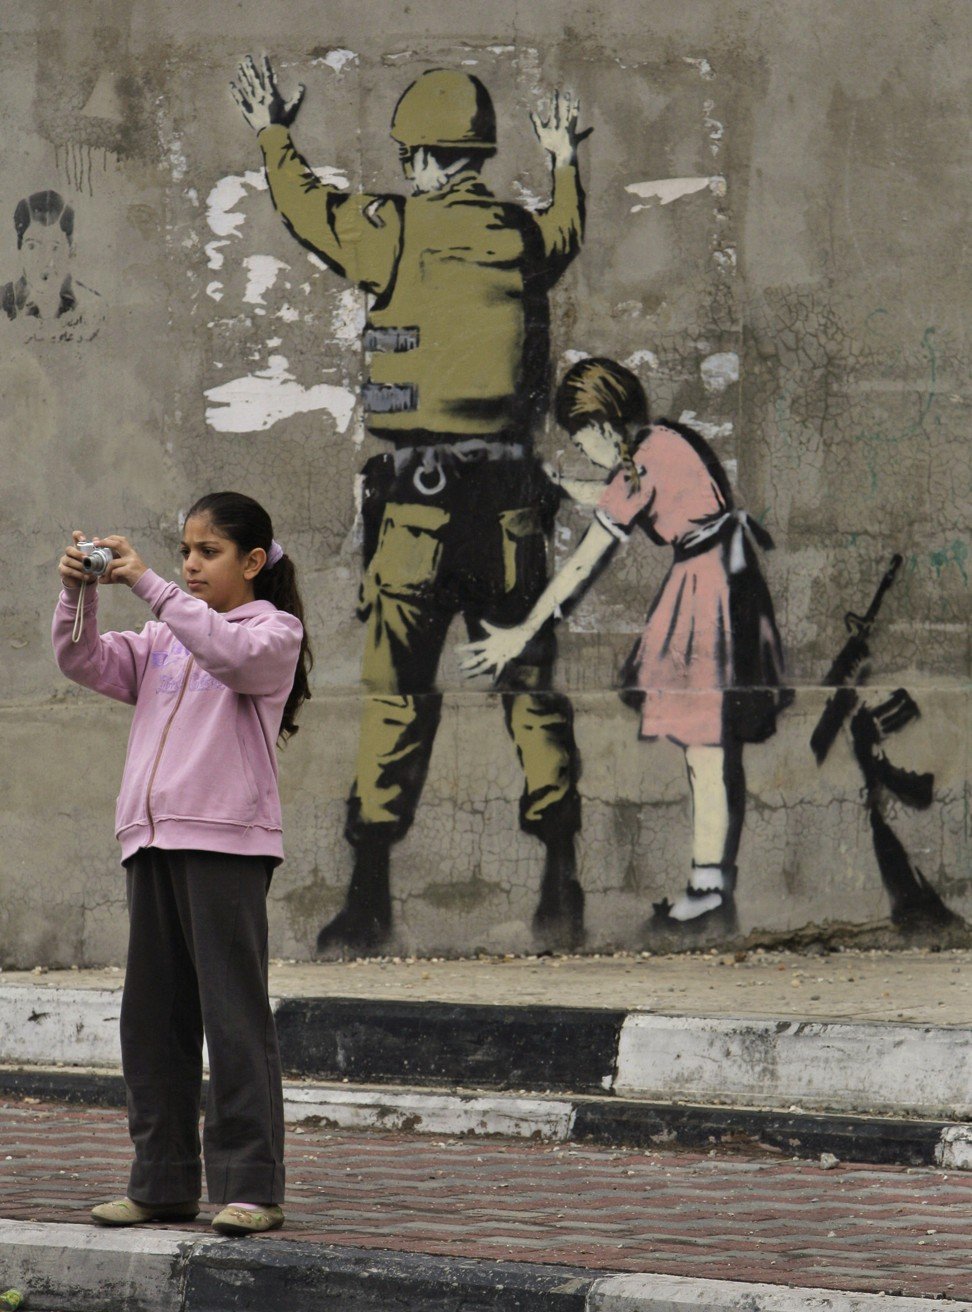 A work by British graffiti artist Banksy on a wall in the West Bank town of Bethlehem. Photo: AP